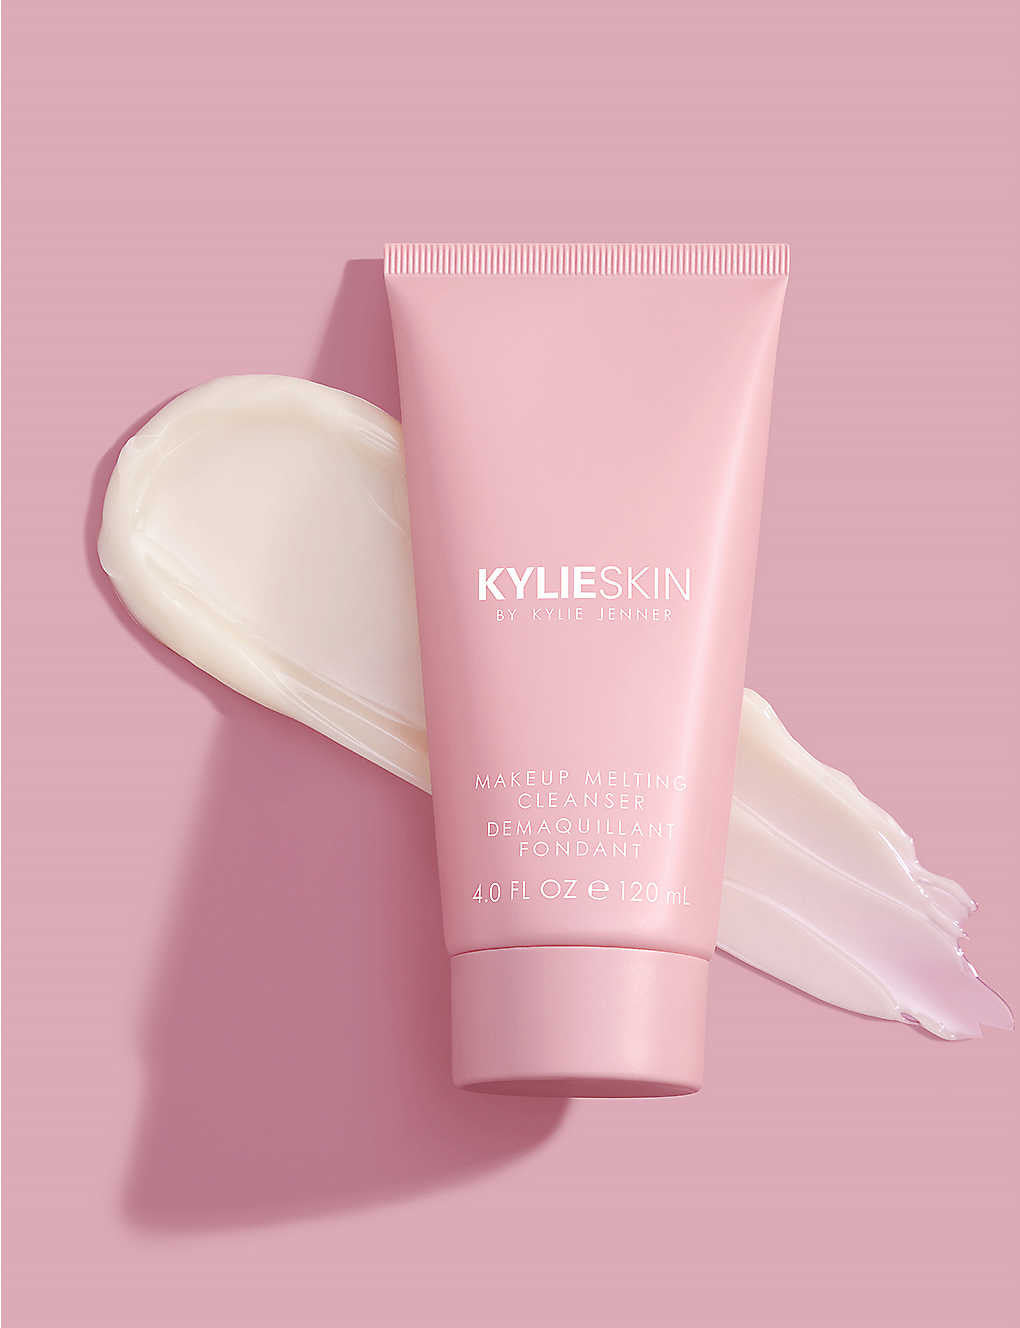 KYLIE BY KYLIE JENNER Makeup Melting cleanser 120ml